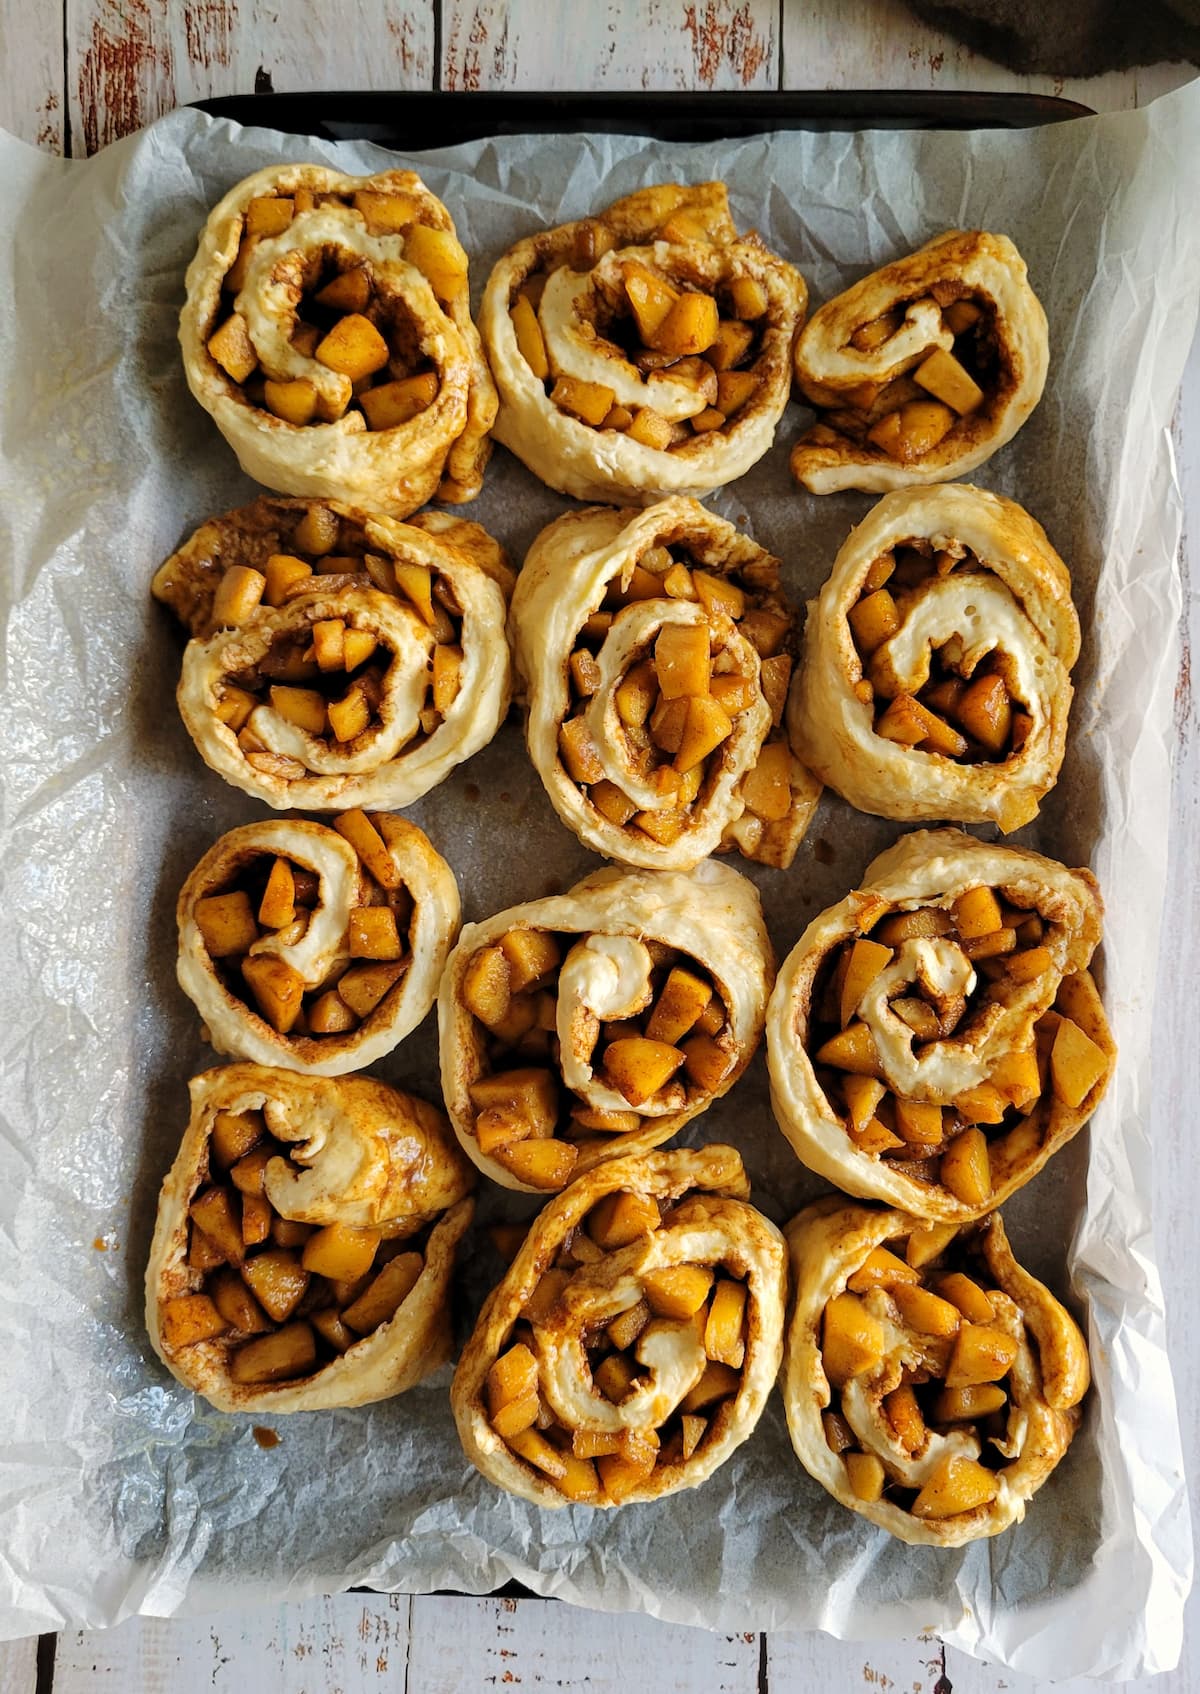 unbaked cinnamon and apple rolls on a parchment lined baking sheet